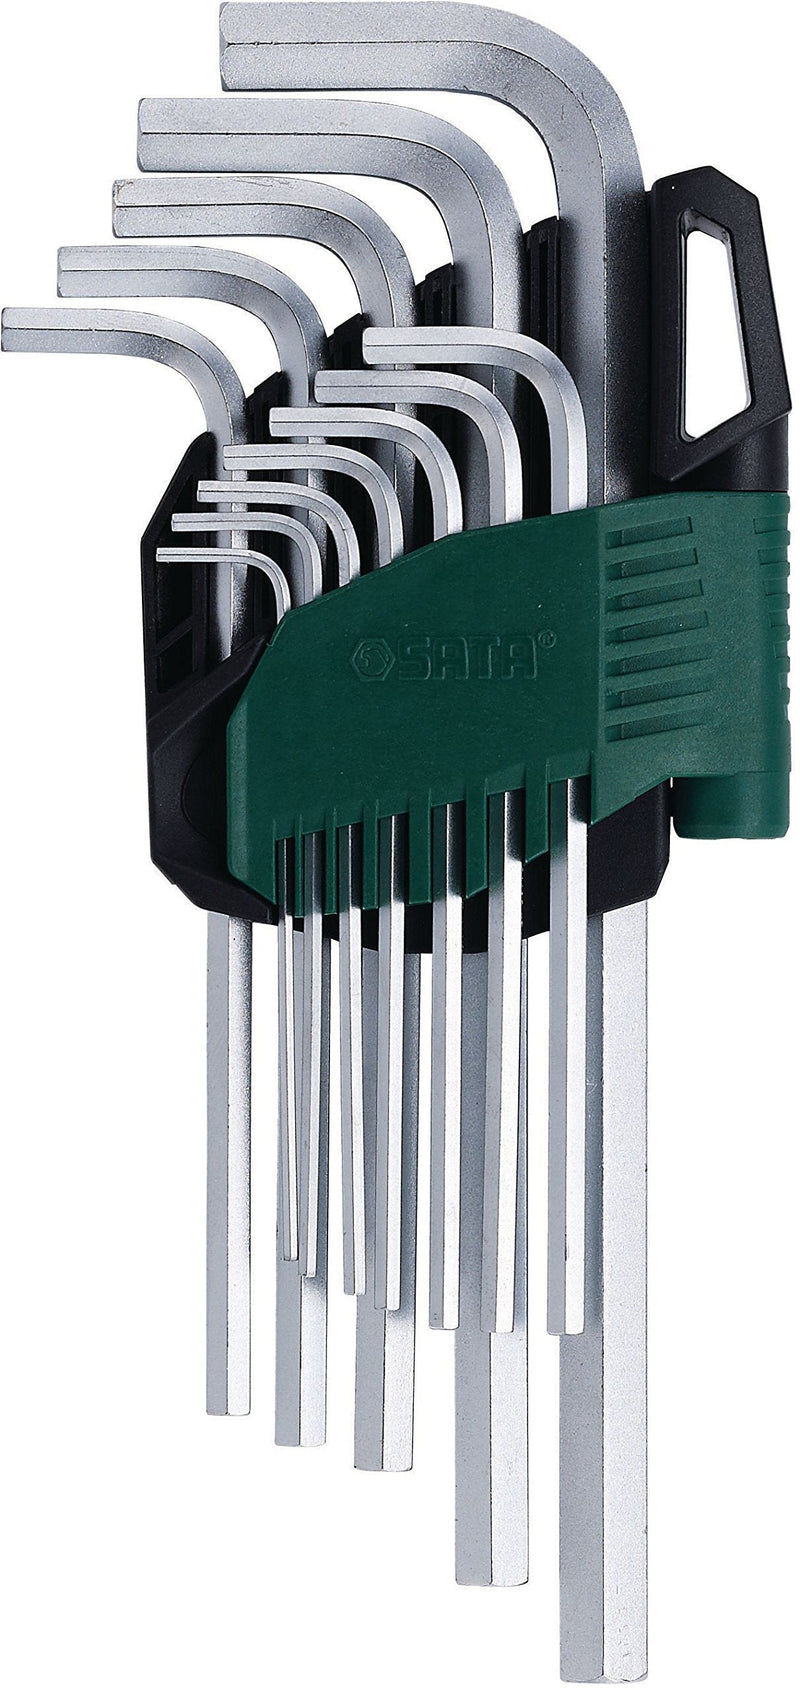  [AUSTRALIA] - SATA 12-Piece Long Arm SAE Hex Key Set with Chamfered Tips and Green Nylon Fiber Carrying Caddy - ST09108SJ 12 Pc., Long Arm, Hex Key Set,  SAE